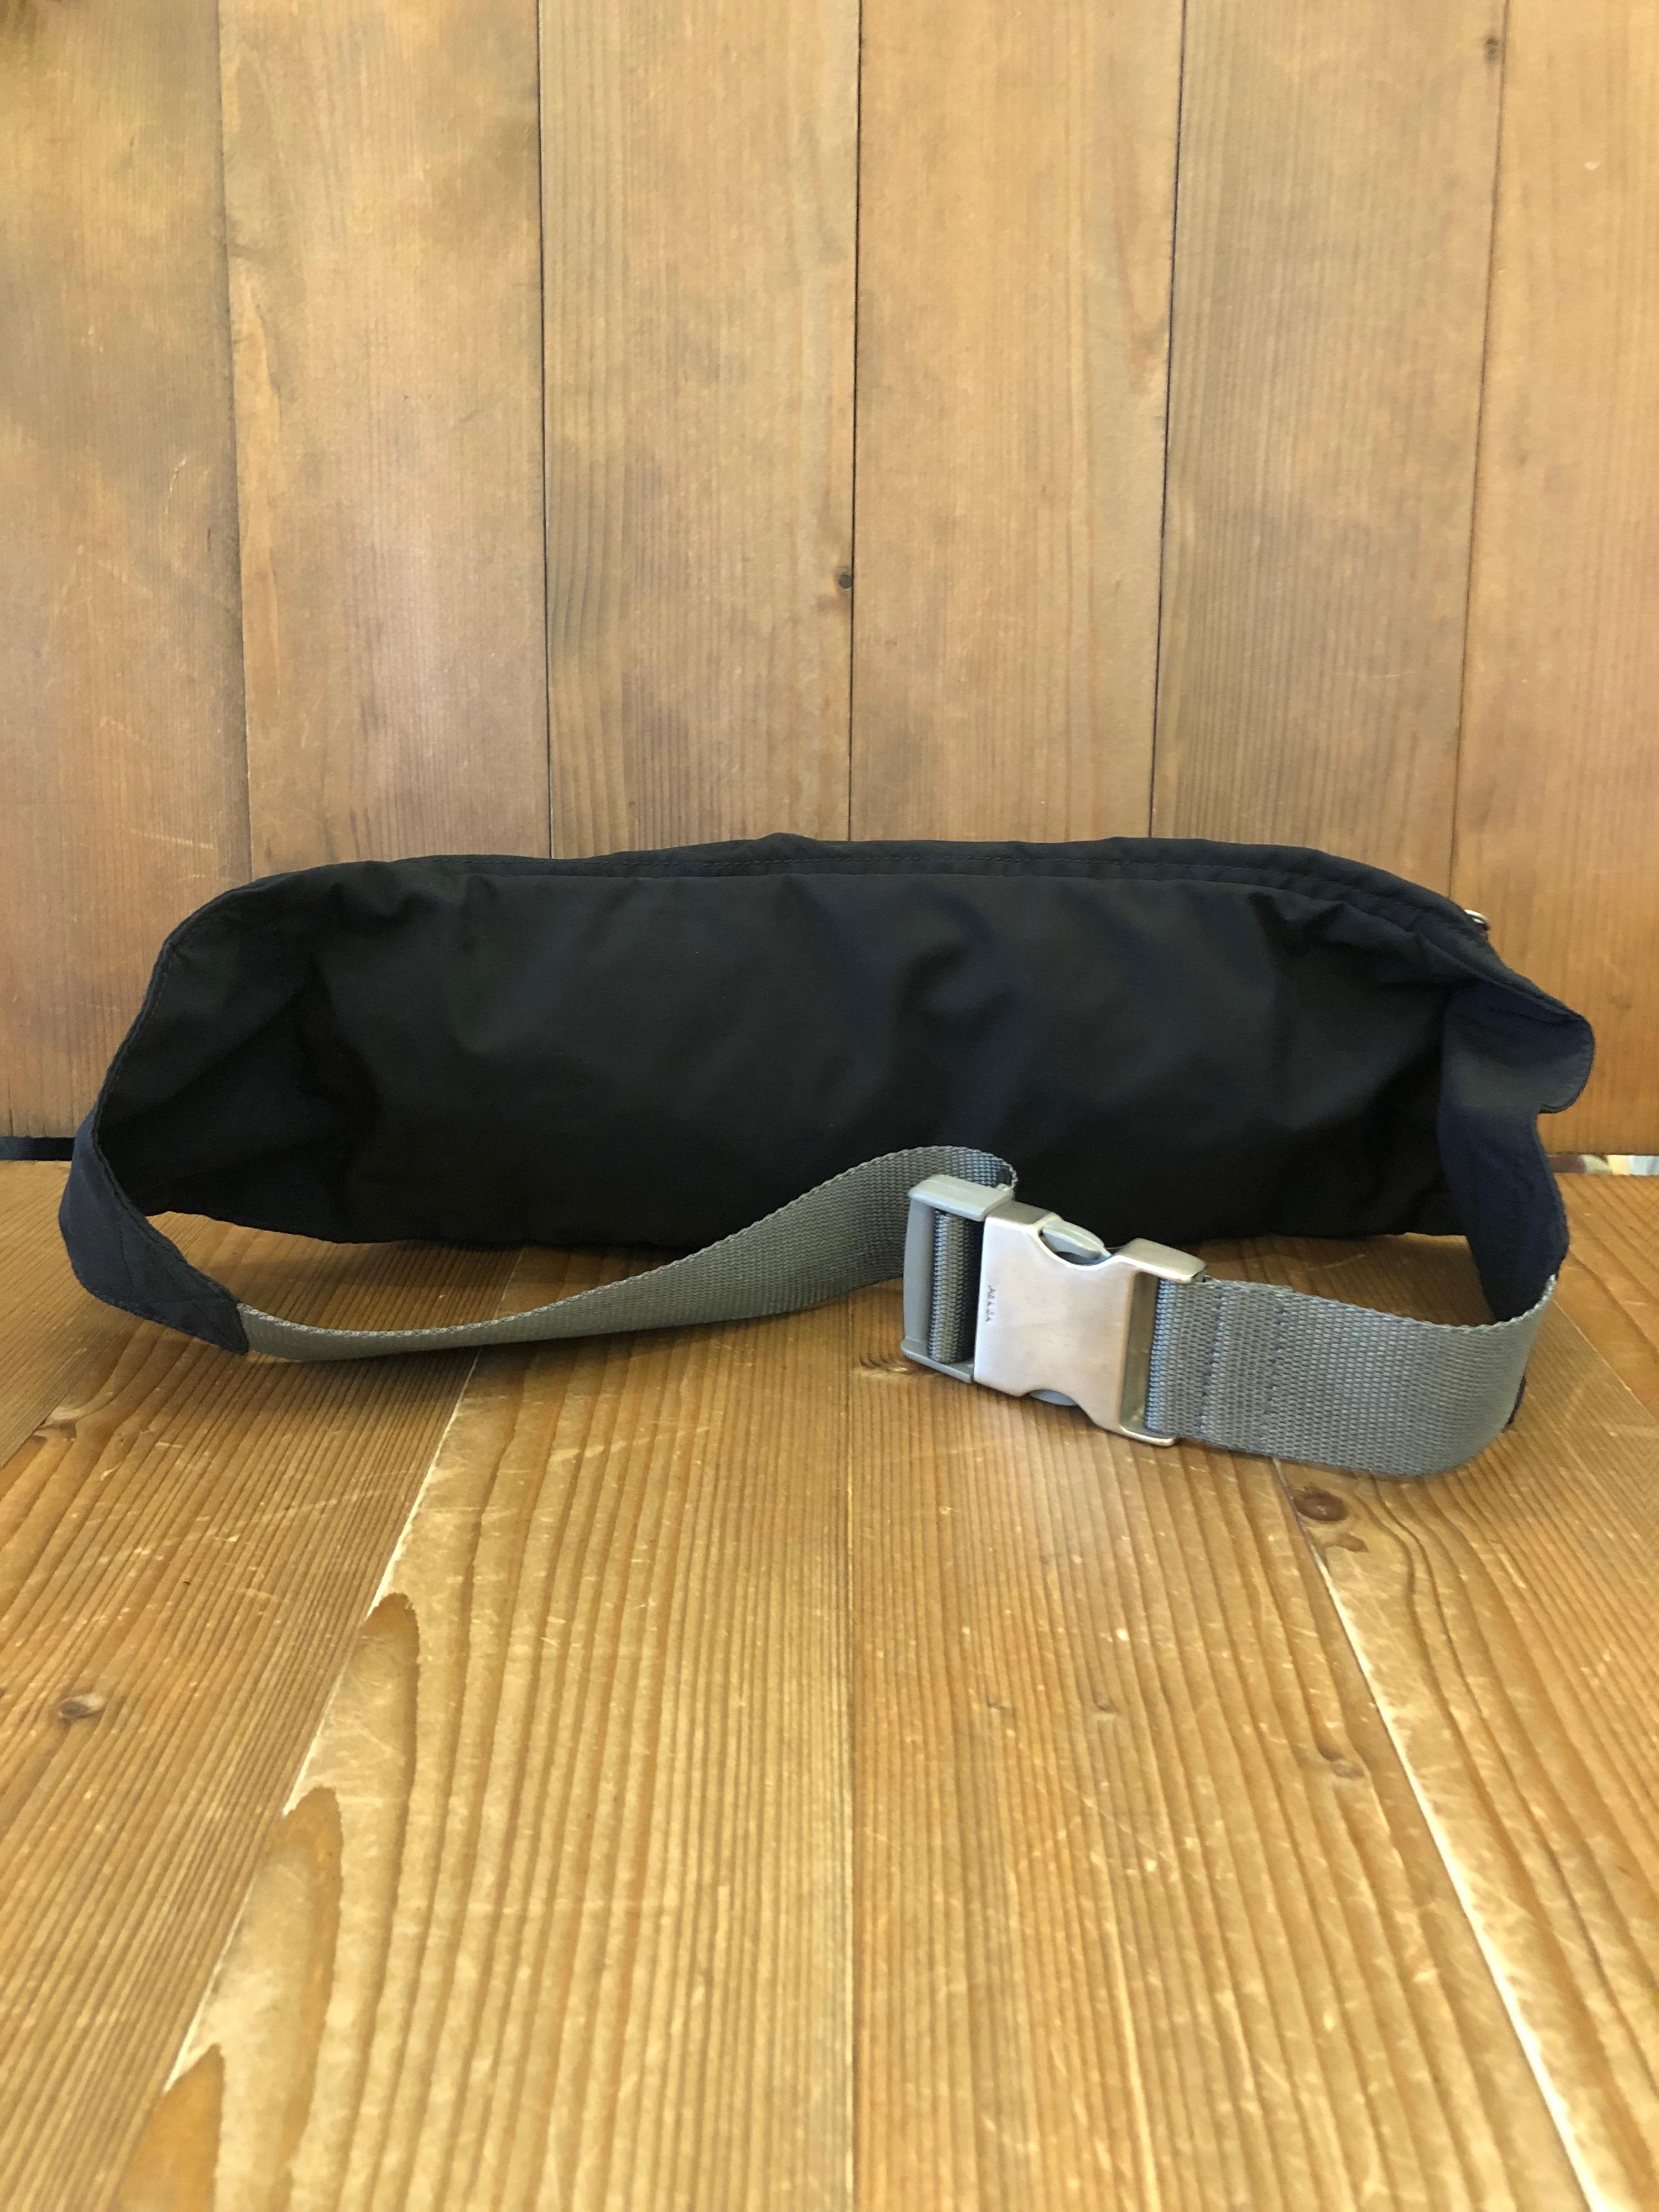 Vintage PRADA Spots polyester bumbag in black featuring two zippered compartments. Made in Italy. Buckle closure. Measures 12 x 5 x 2 inches Up to 36 inch waist

Condition - Some signs of wear consistent with age and normal use

Outside: Minor marks